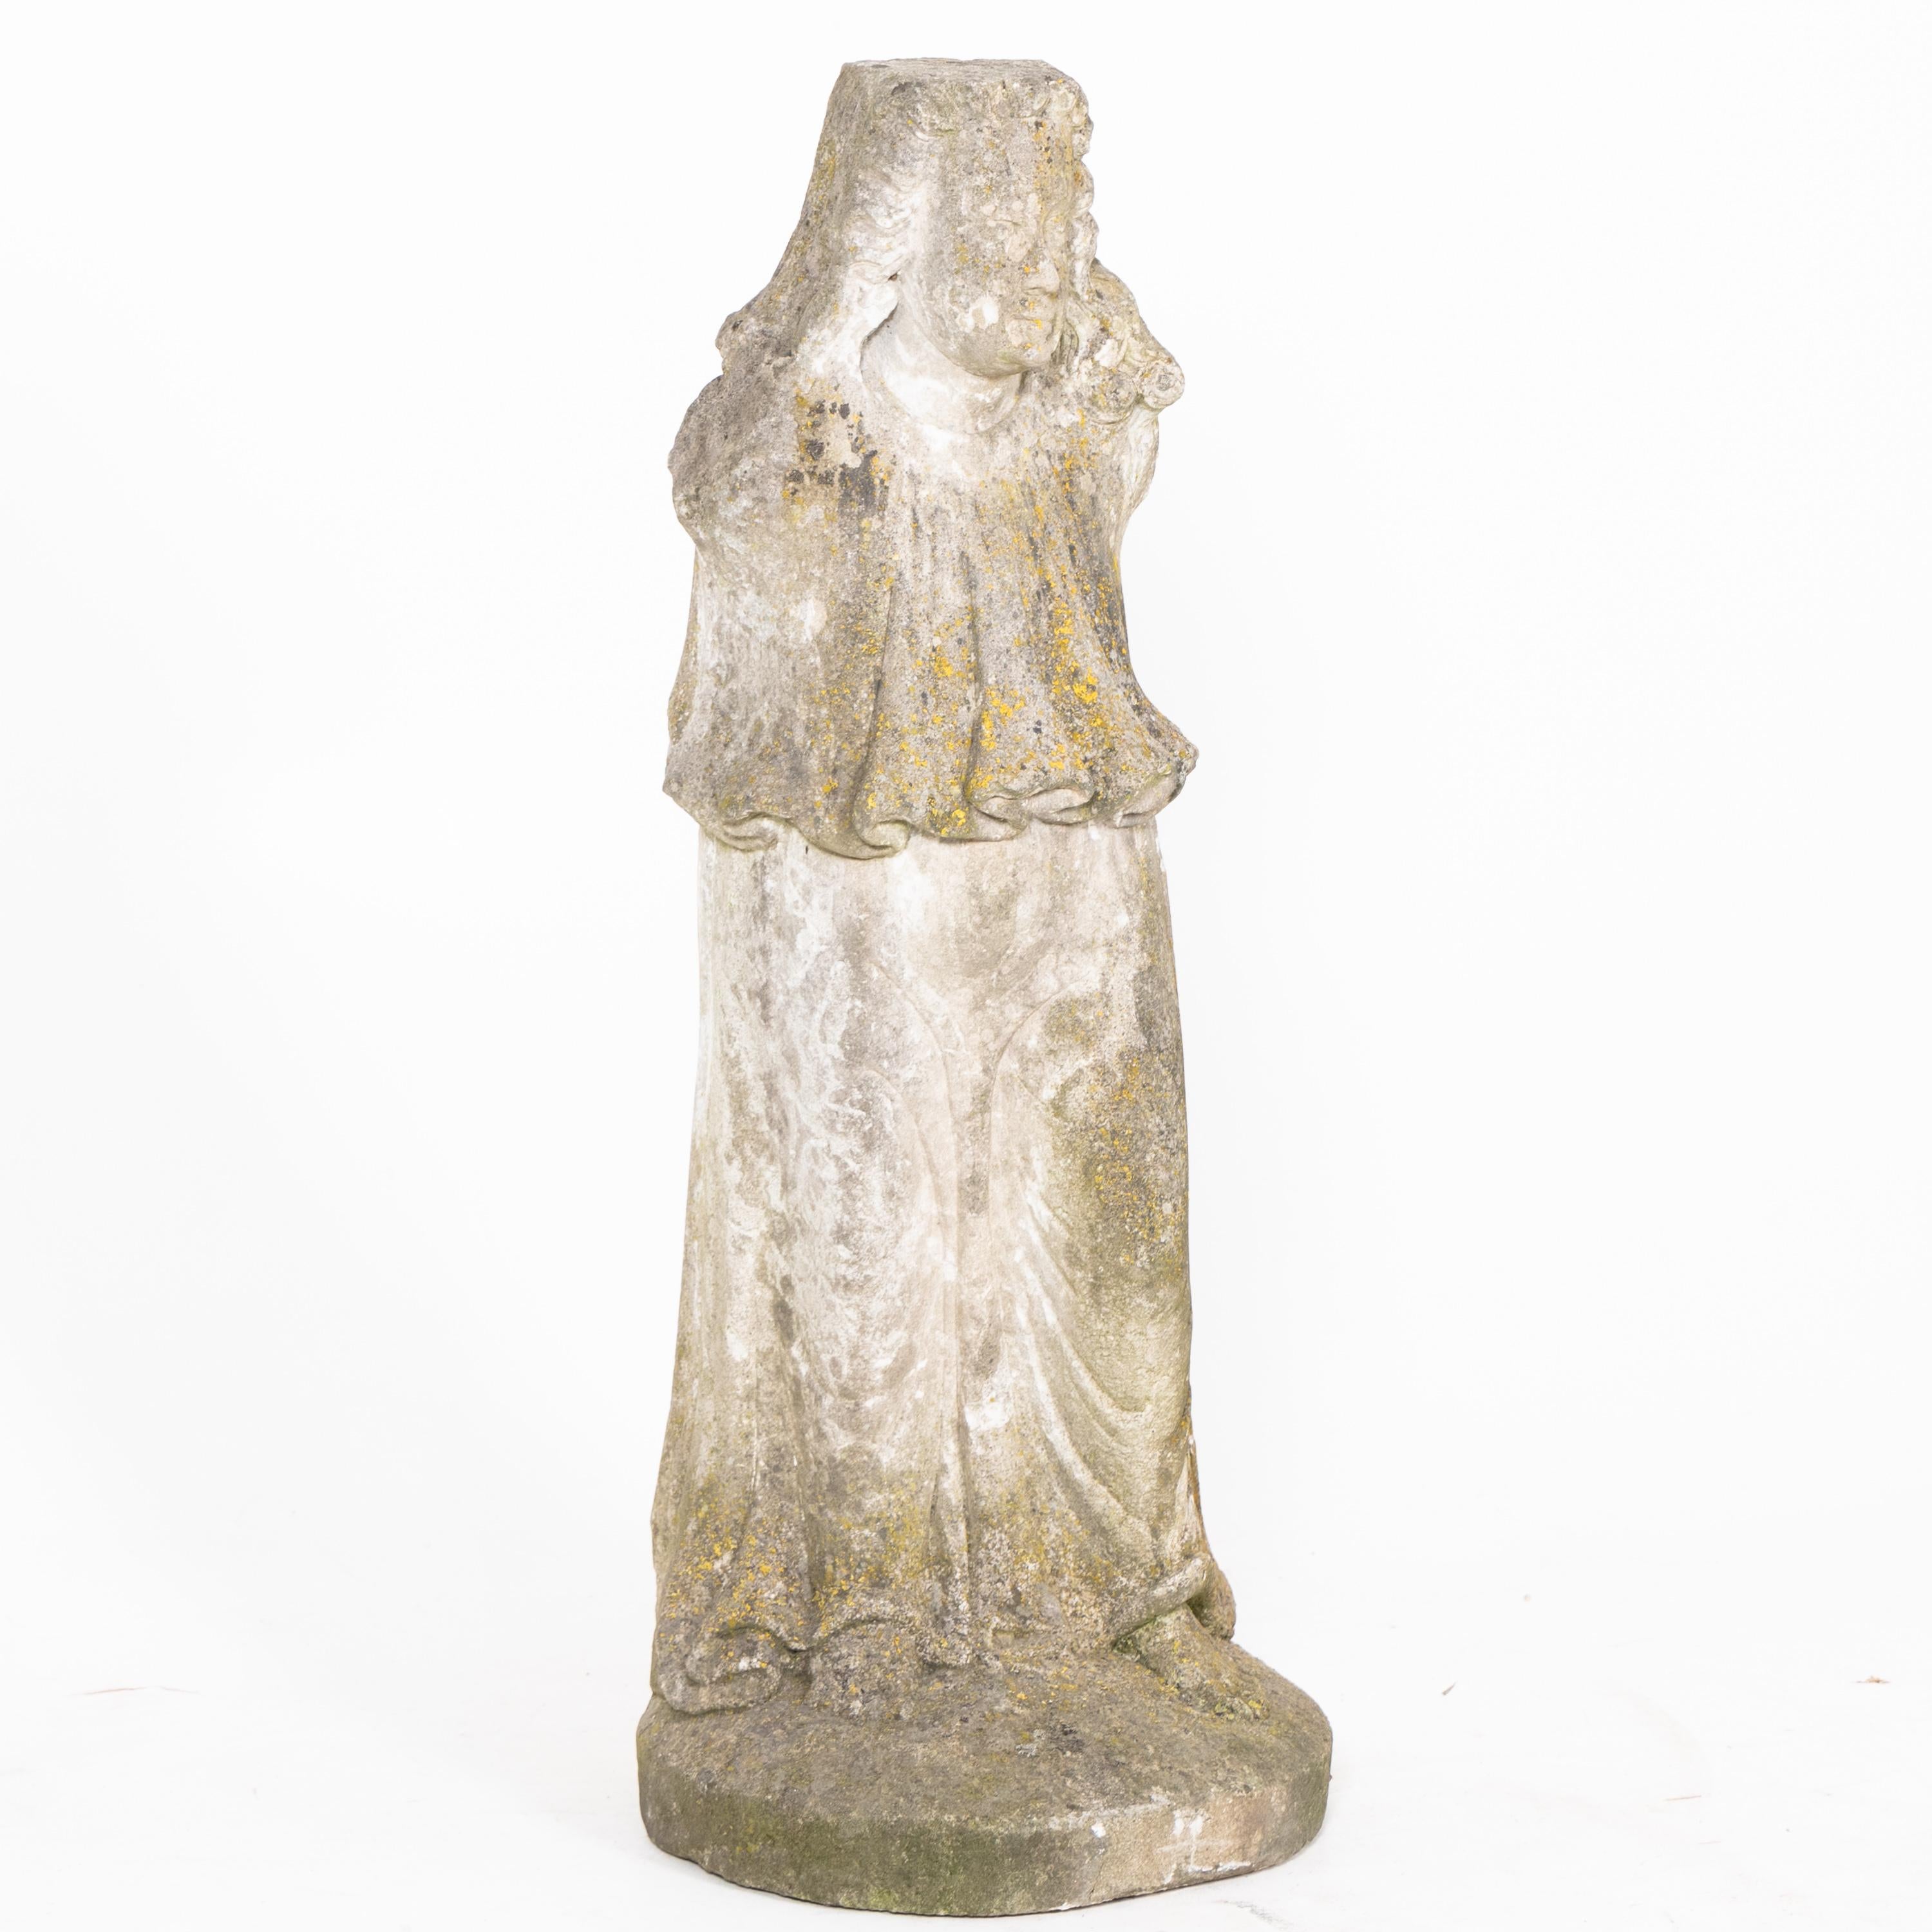 Sandstone sculpture of a saint in a garment rich in folds. Arms and attributes missing. Weathered patina condition.

  